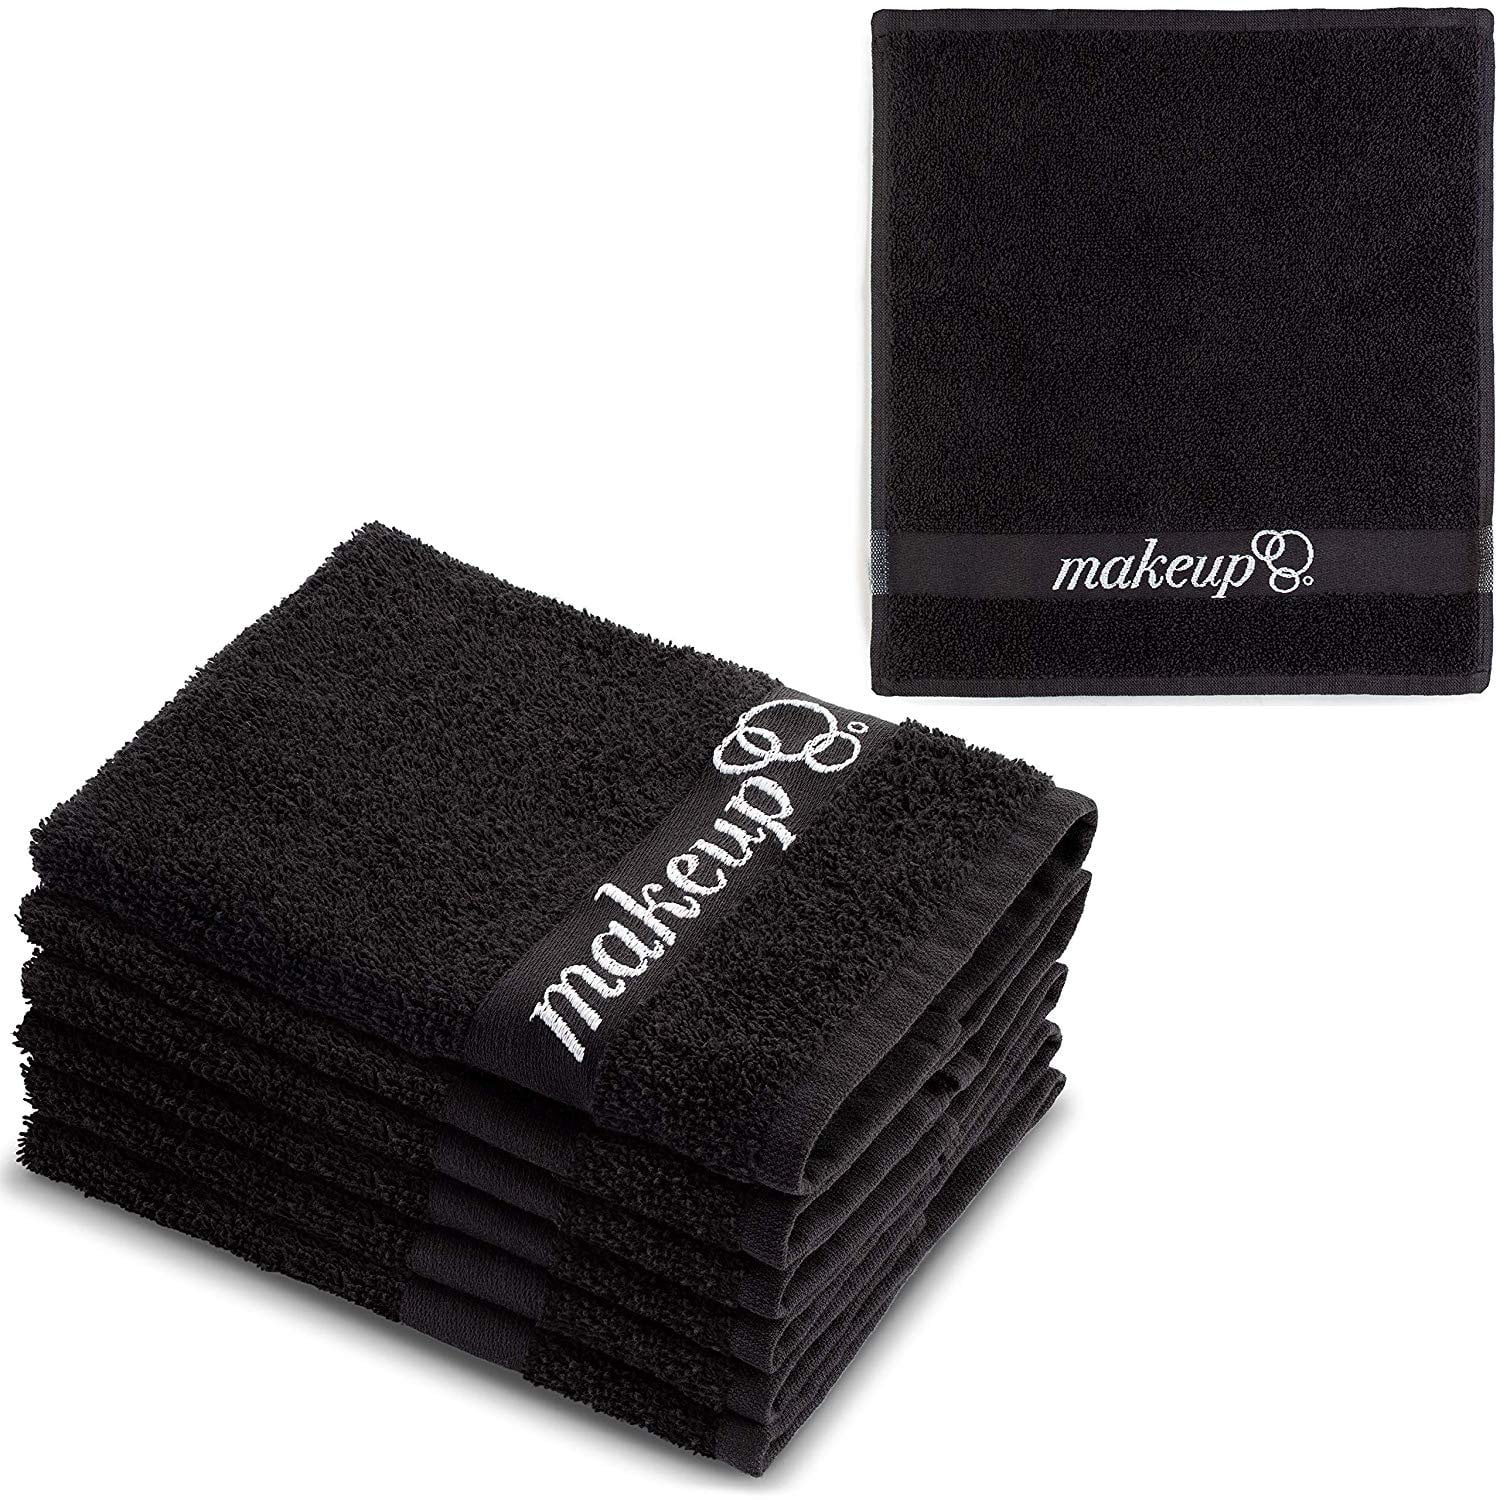 White Luxury Hotel Quality Face Cloths Washcloth 100% Cotton Makeup Remover 